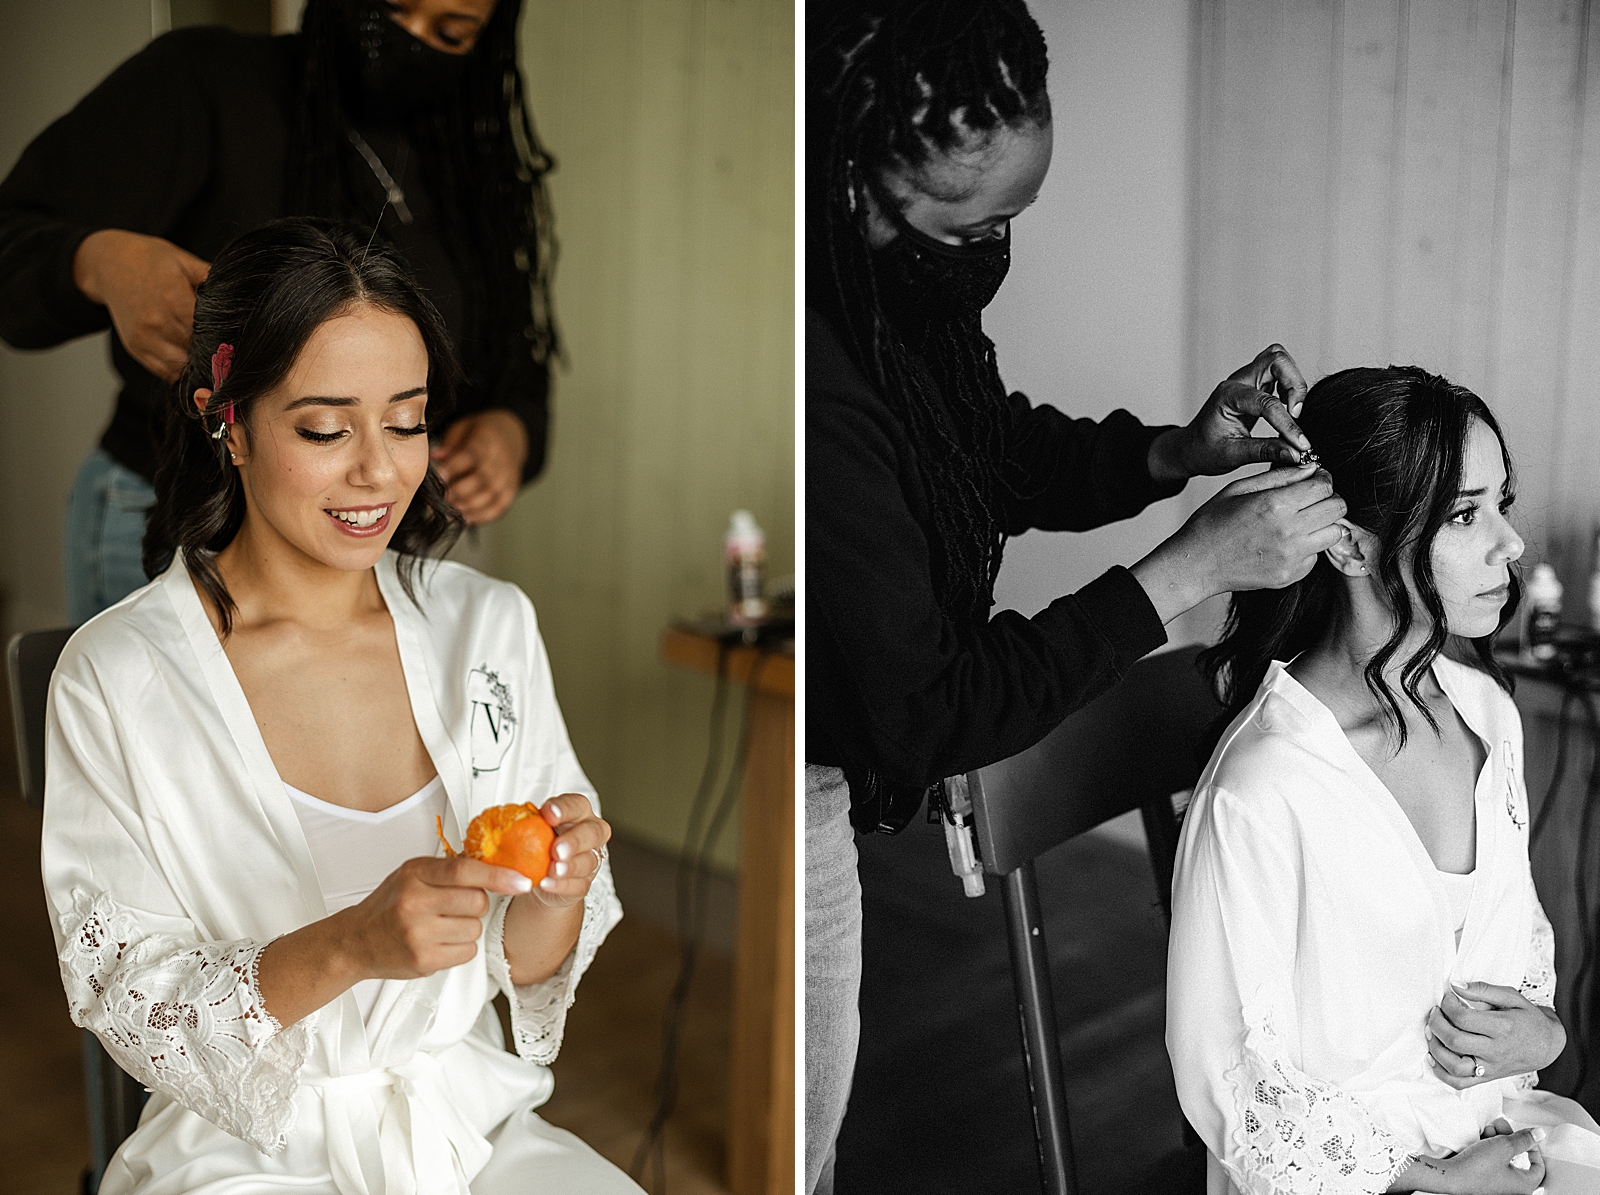 Bride getting hair done by hairstylist and peeling tangerine